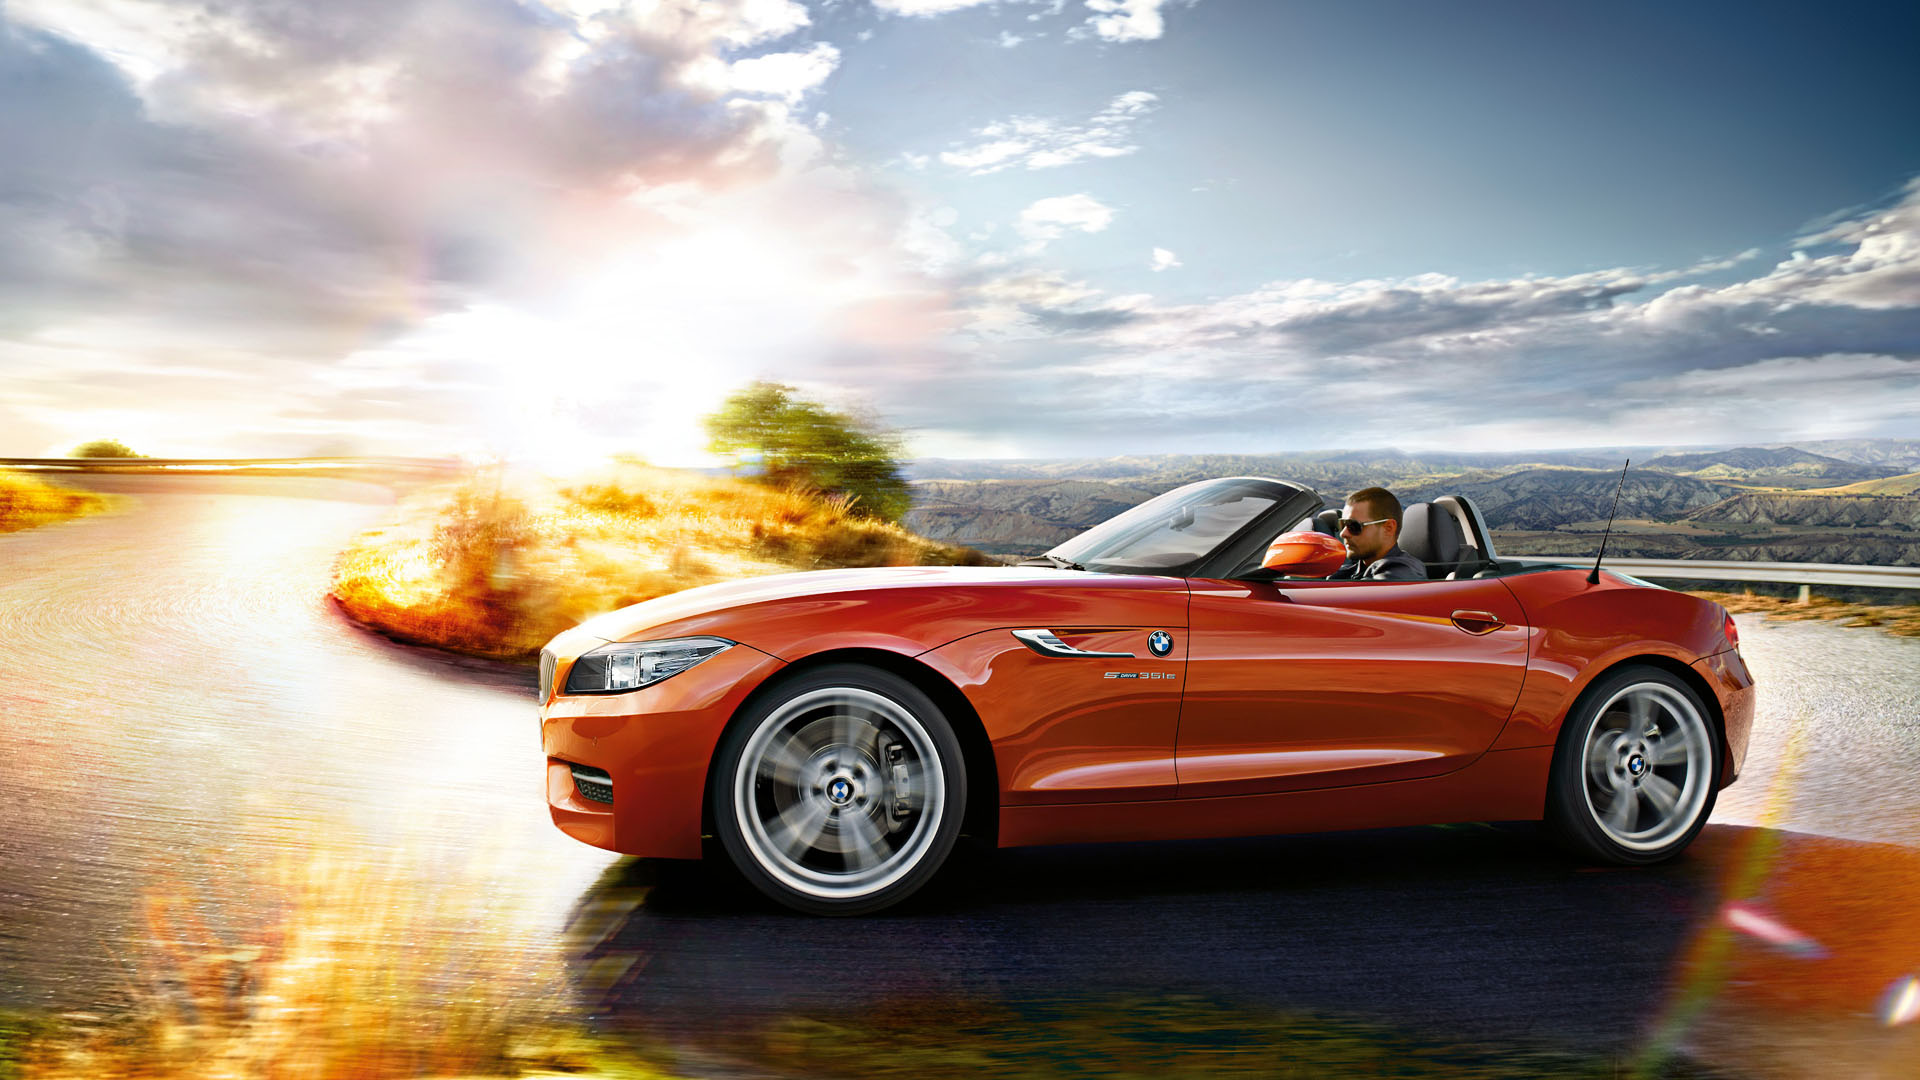 Bmw Z4 Wallpaper HD Available In Different